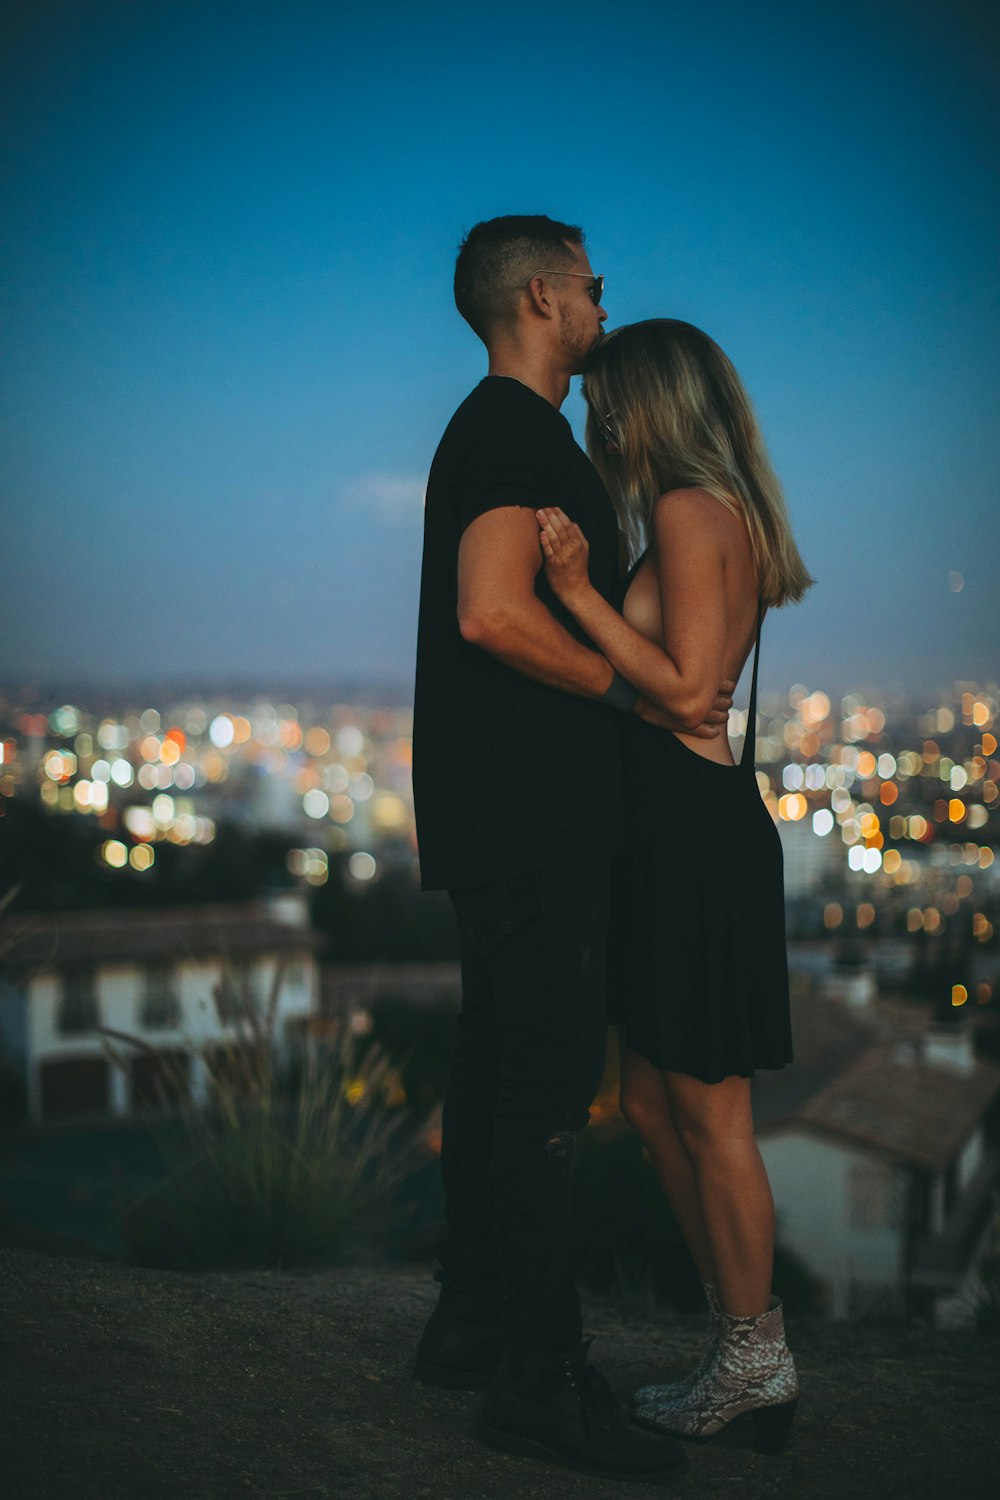 man hugging woman on top of hill during nighttime